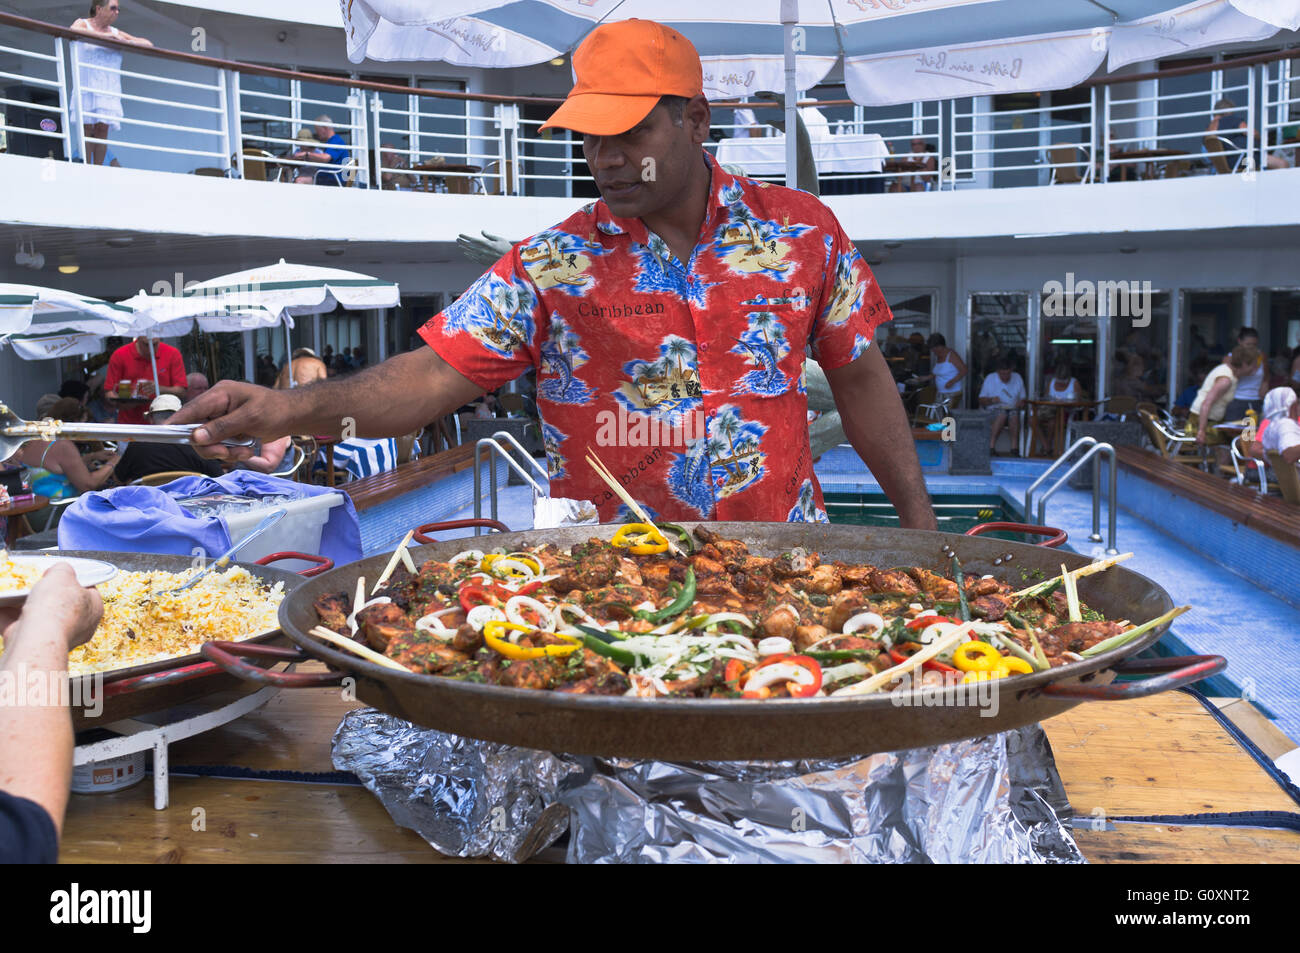 dh CVM Marco Polo Cruise liner CRUISING TRAVEL Chef waiter serving food cruise ships buffet onboard service ship meal on board deck eating holiday Stock Photo